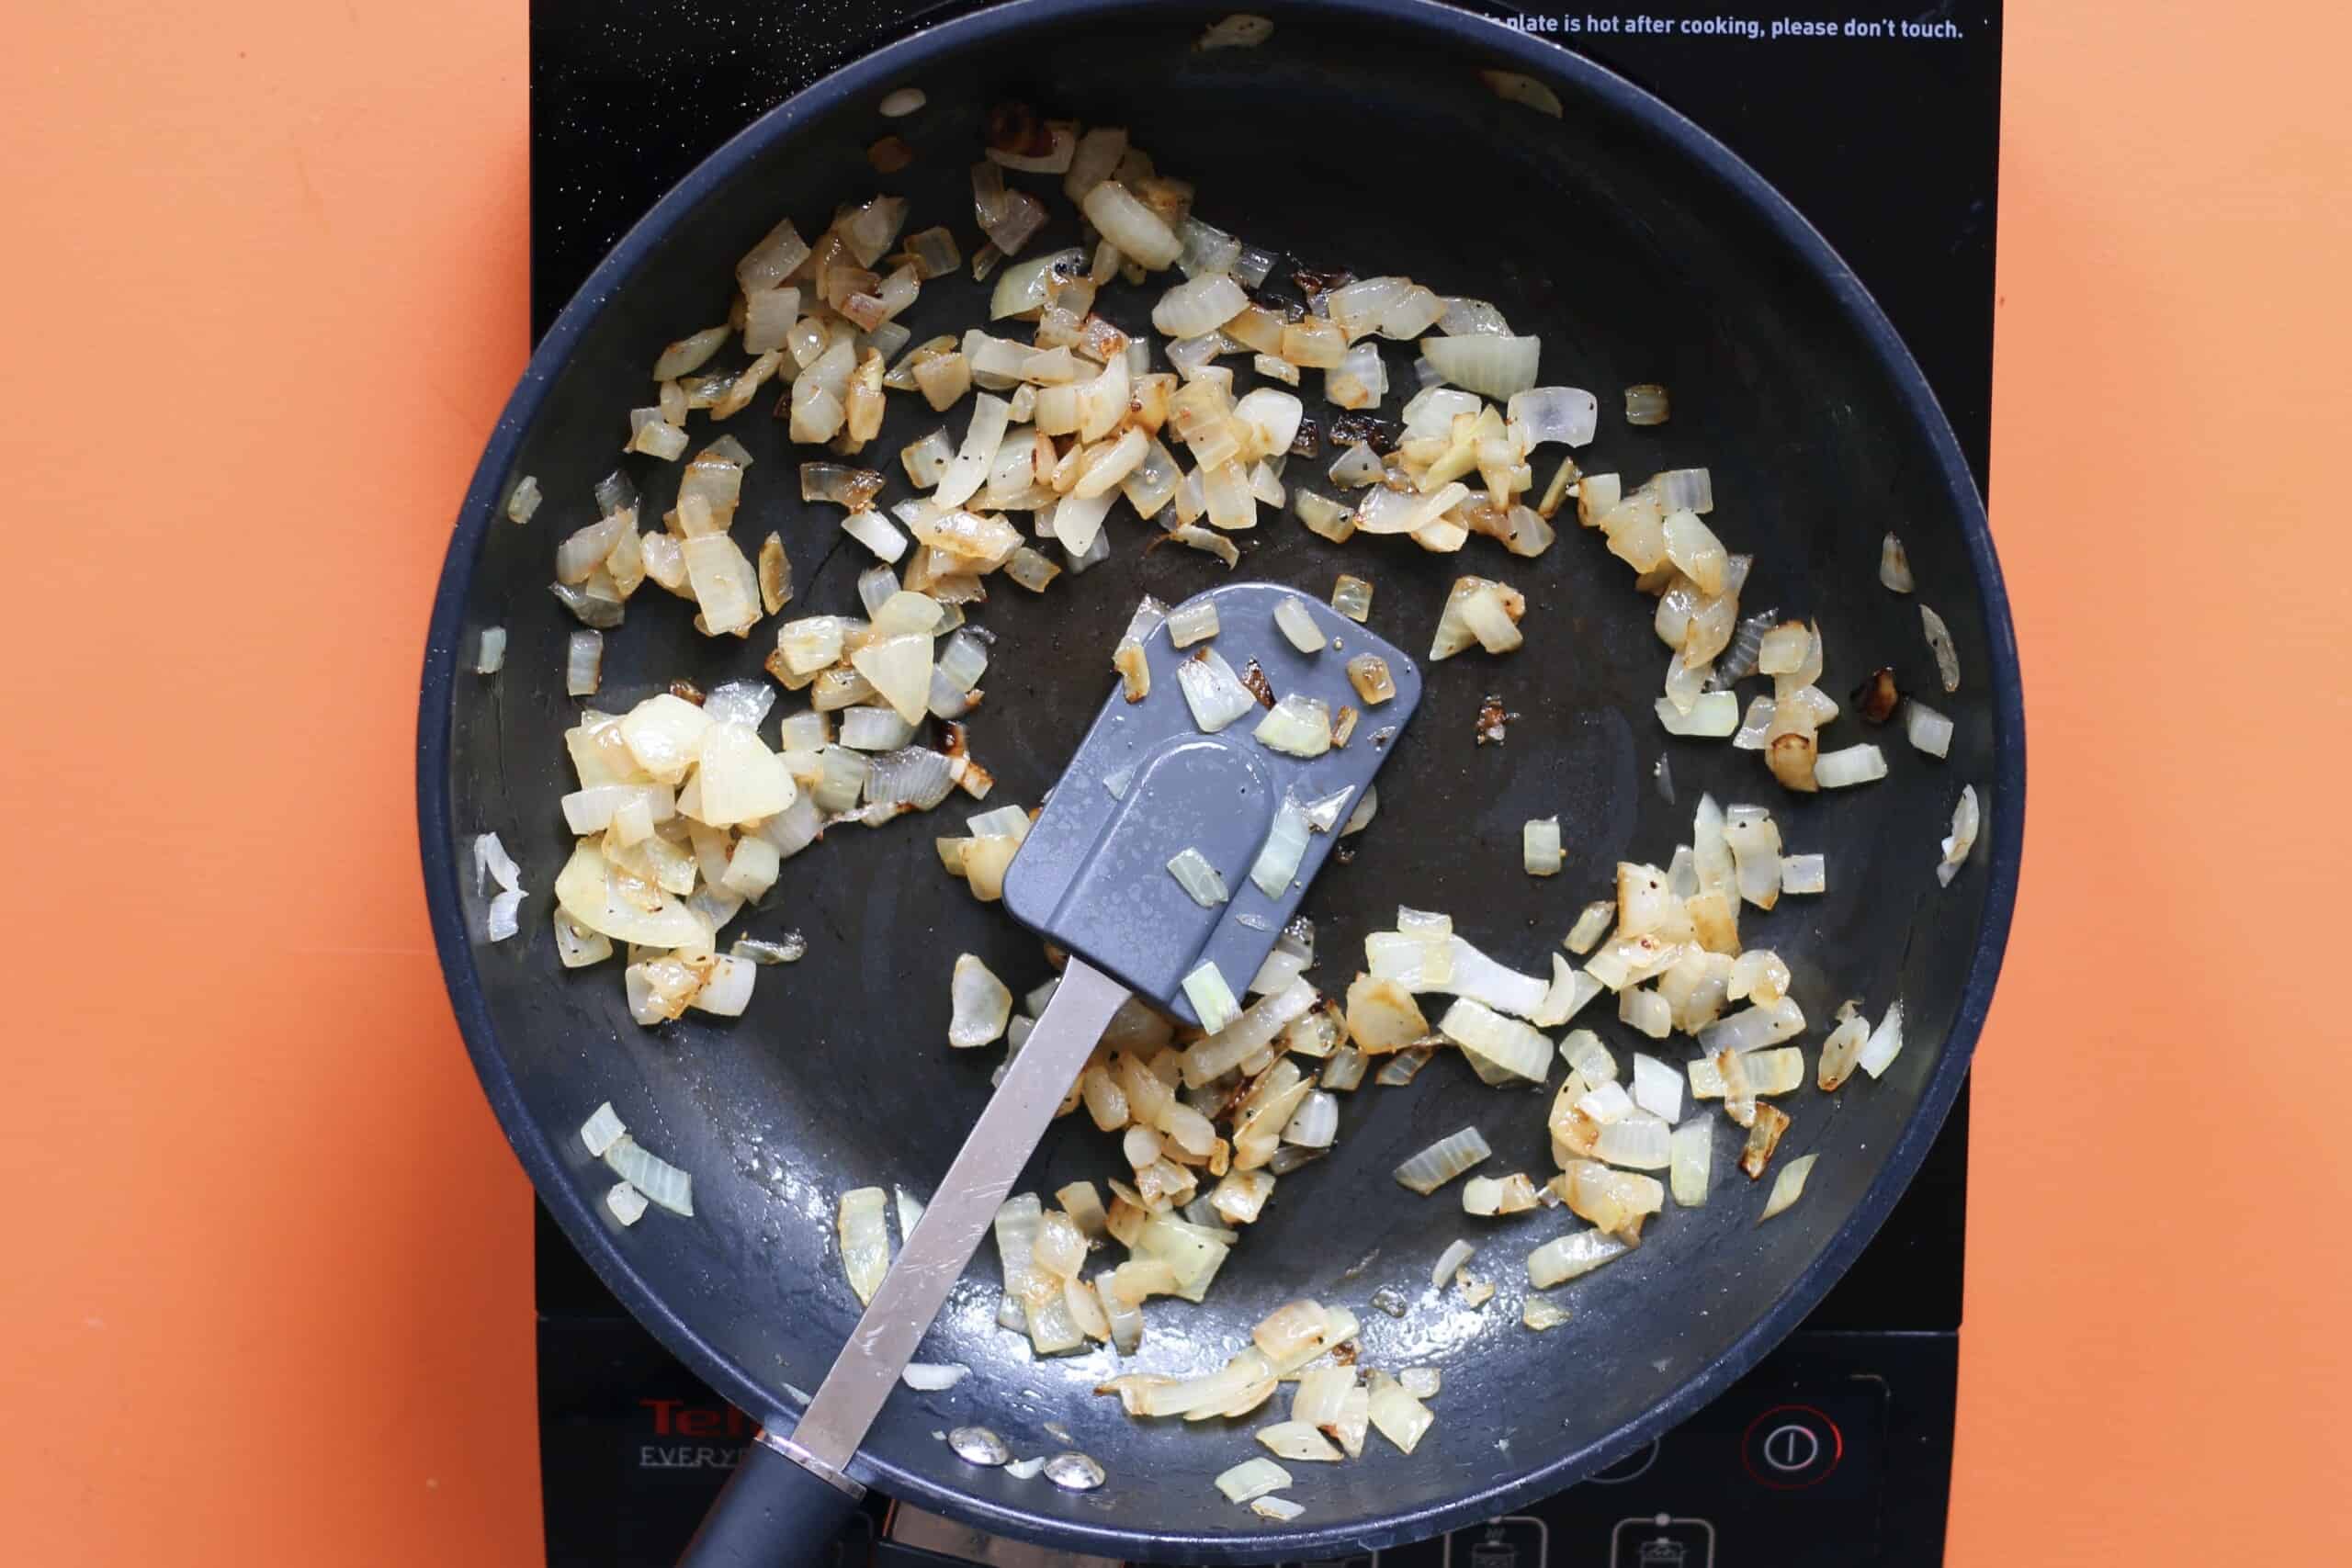 Onions sautéing in frying pan on stove with spatula